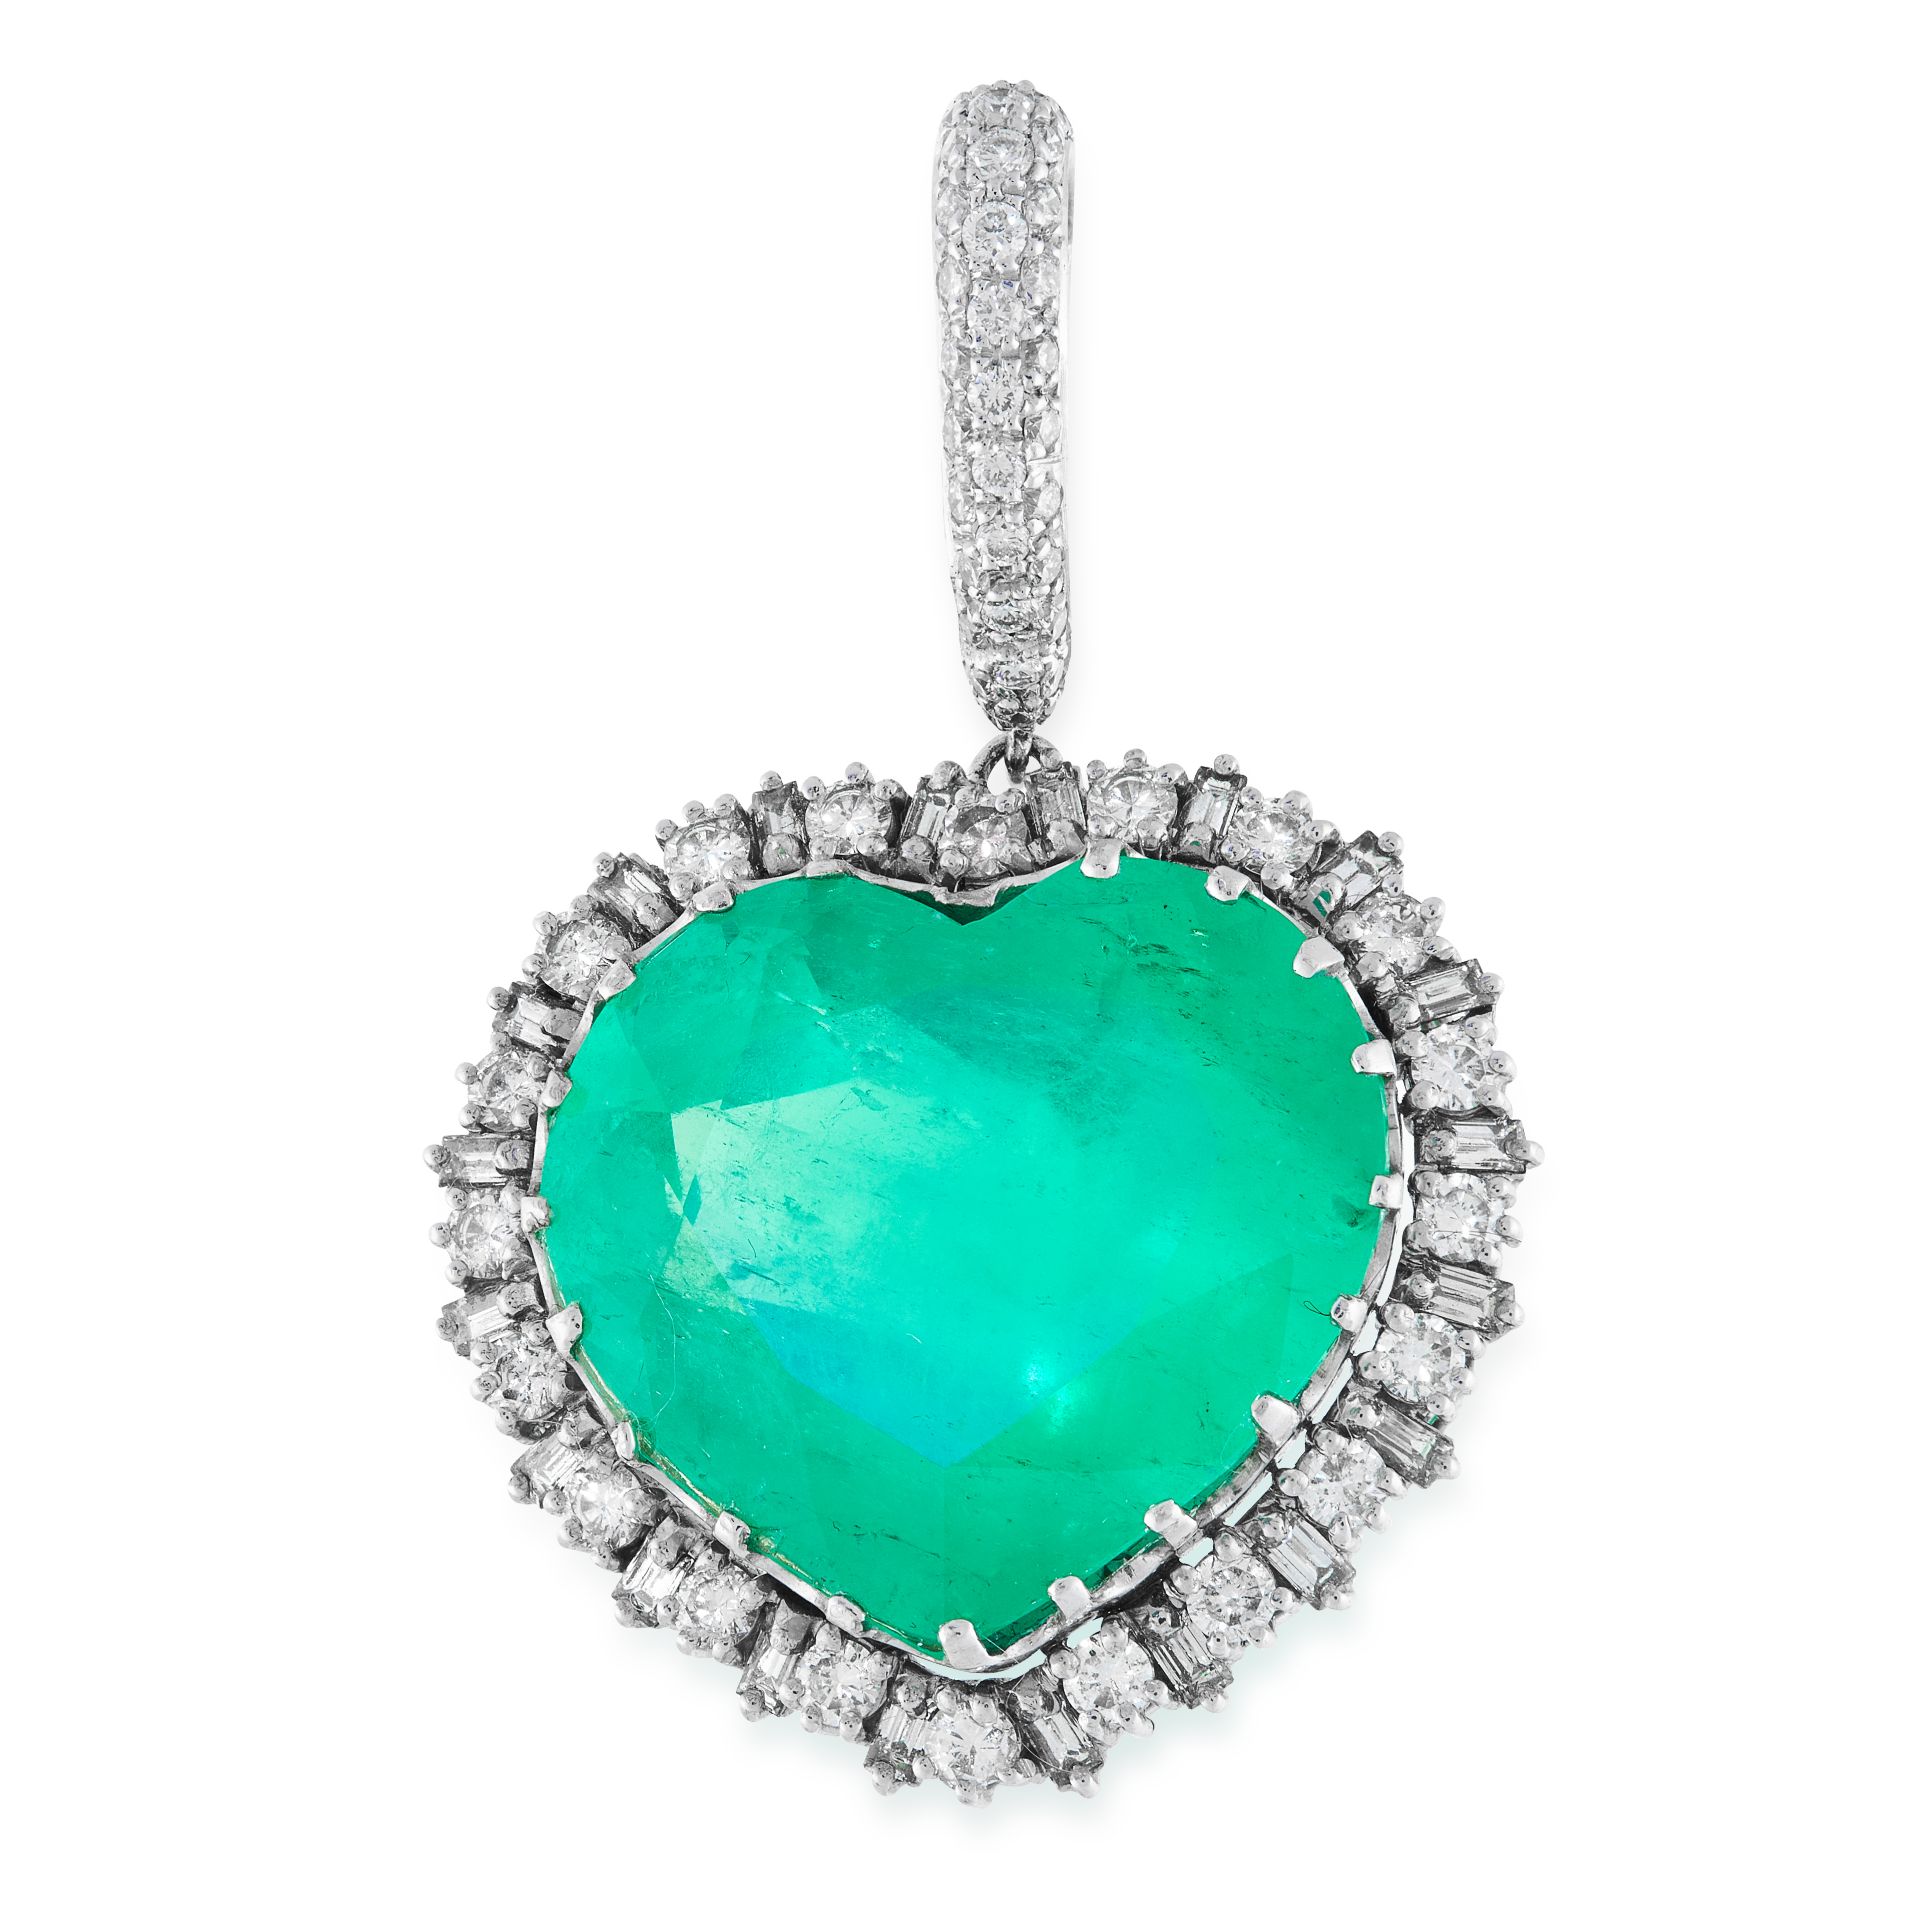 AN EMERALD AND DIAMOND PENDANT in platinum, comprising of a heart cut emerald of approximately 34.80